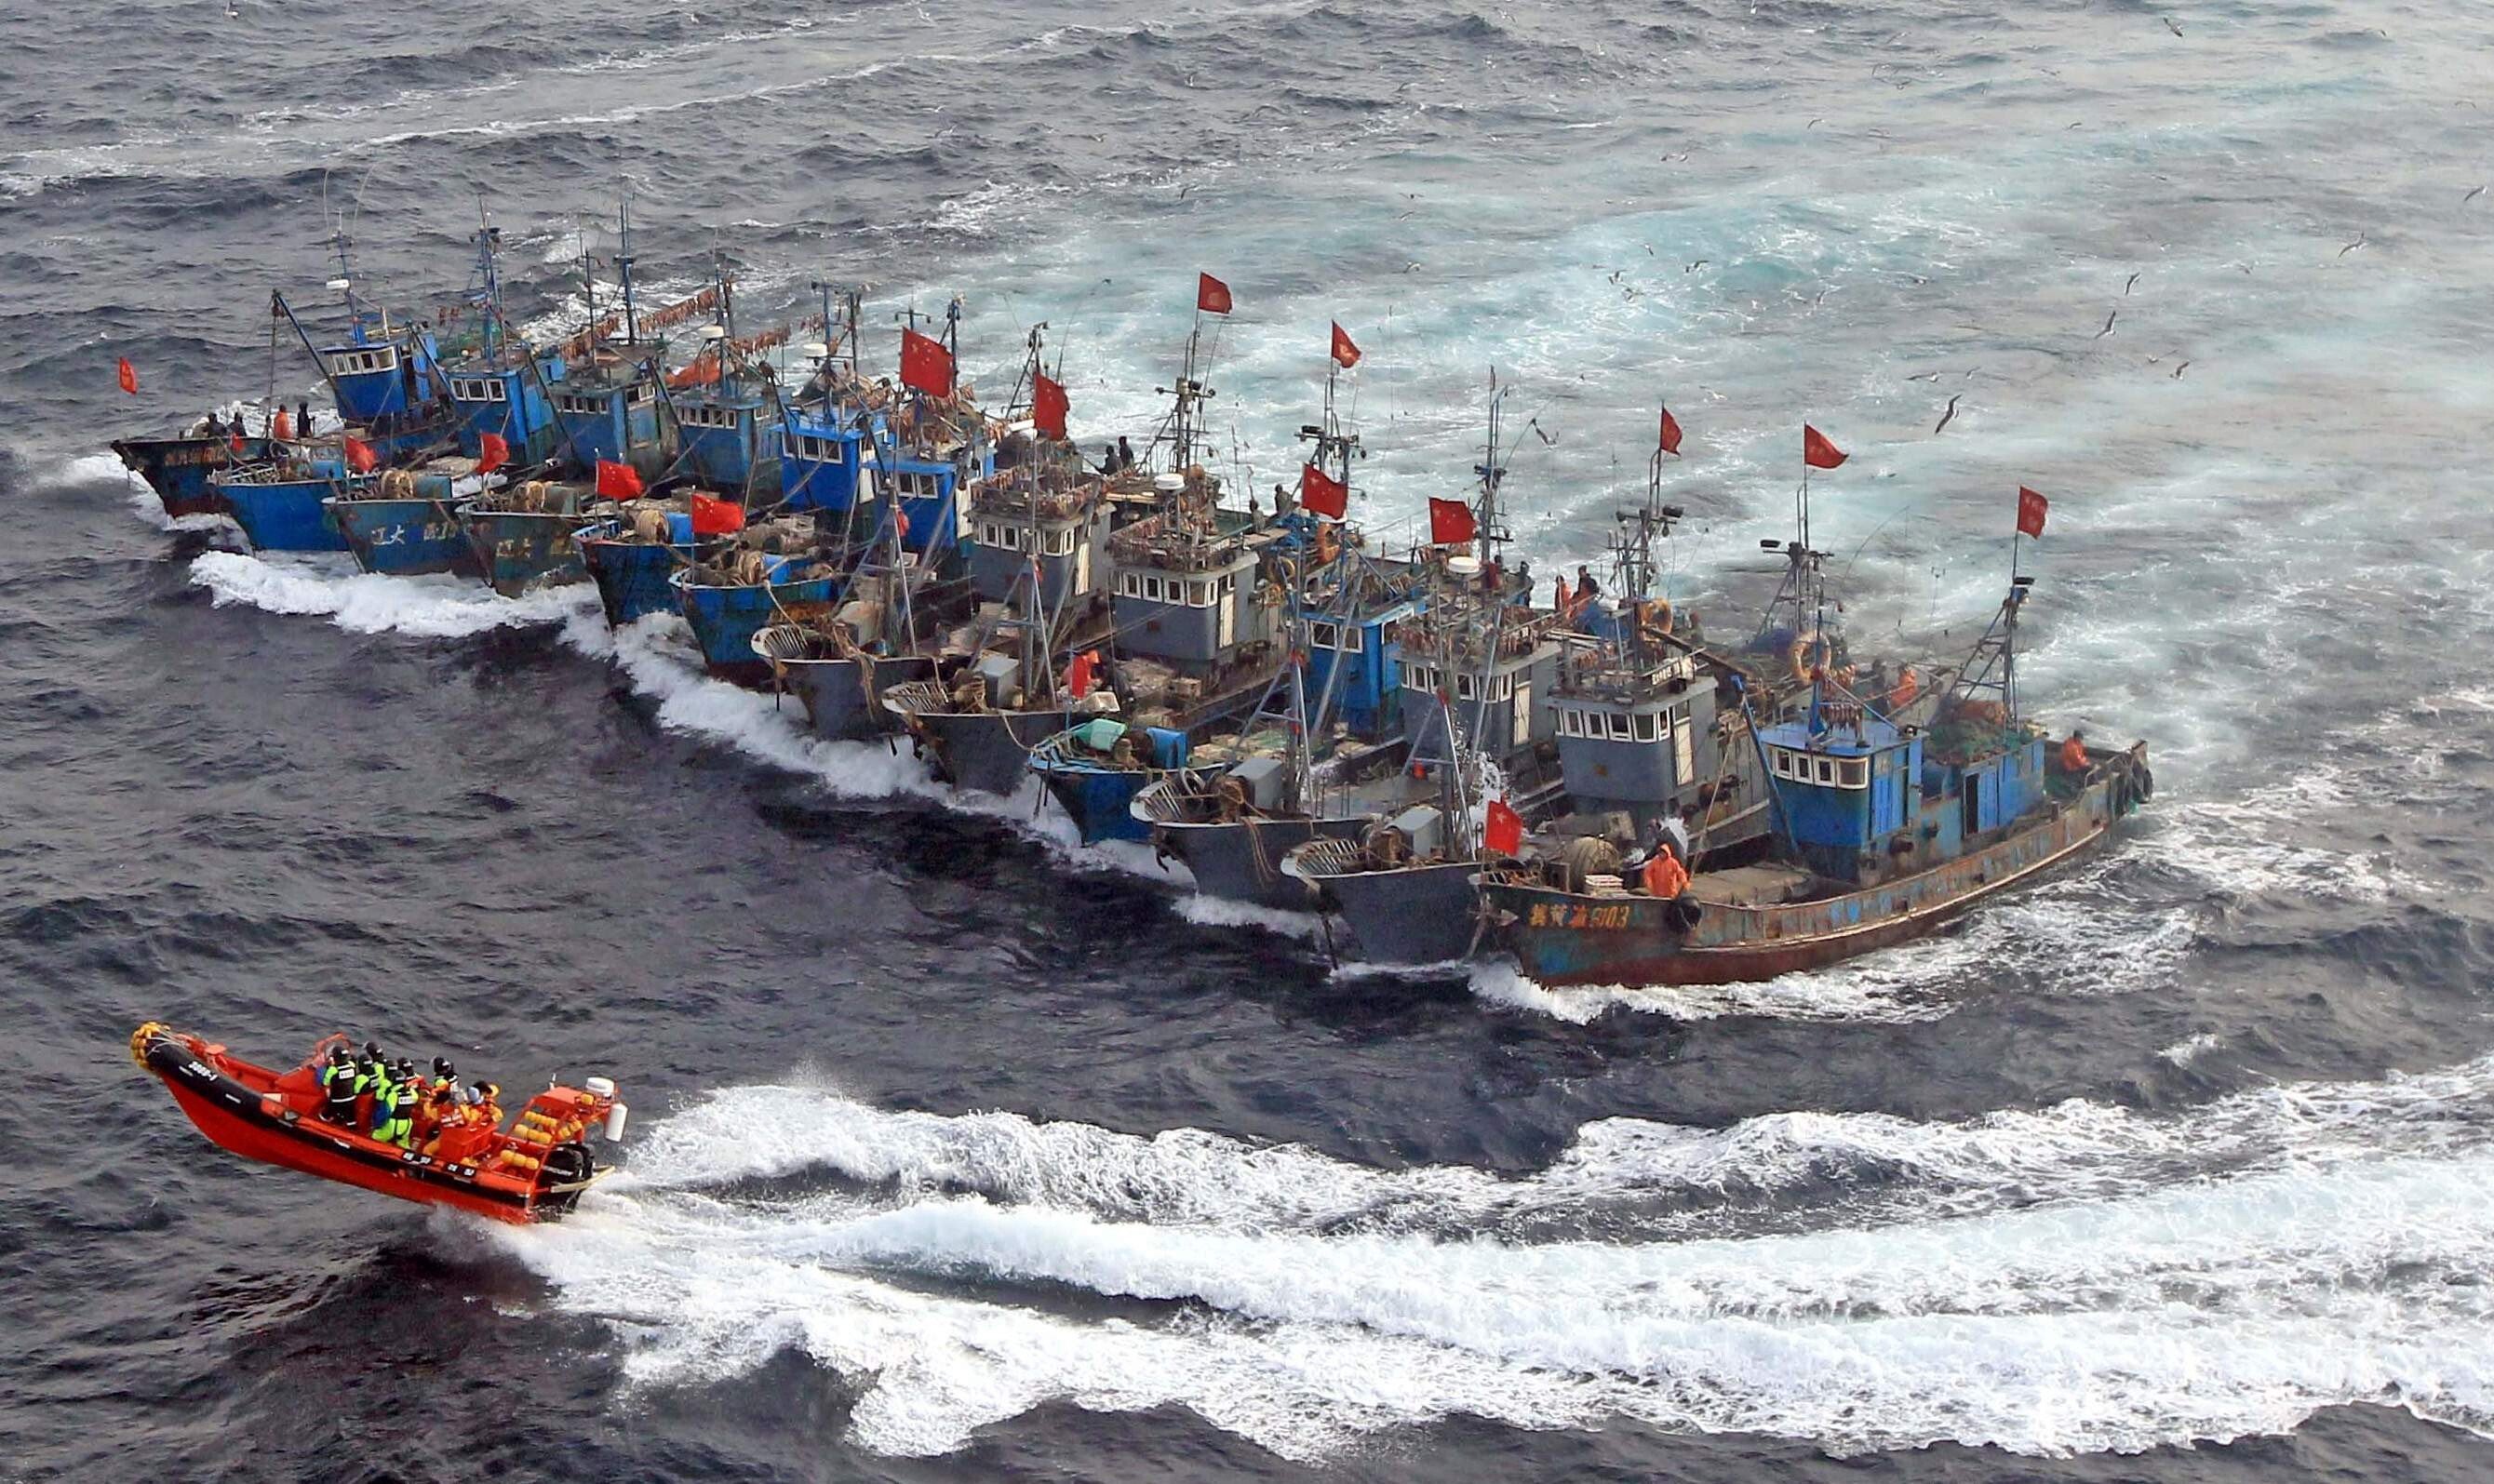 Chinese fishing boats tied together in the Sea of Japan, or East Sea, on December 21, 2019. Photo: AFP